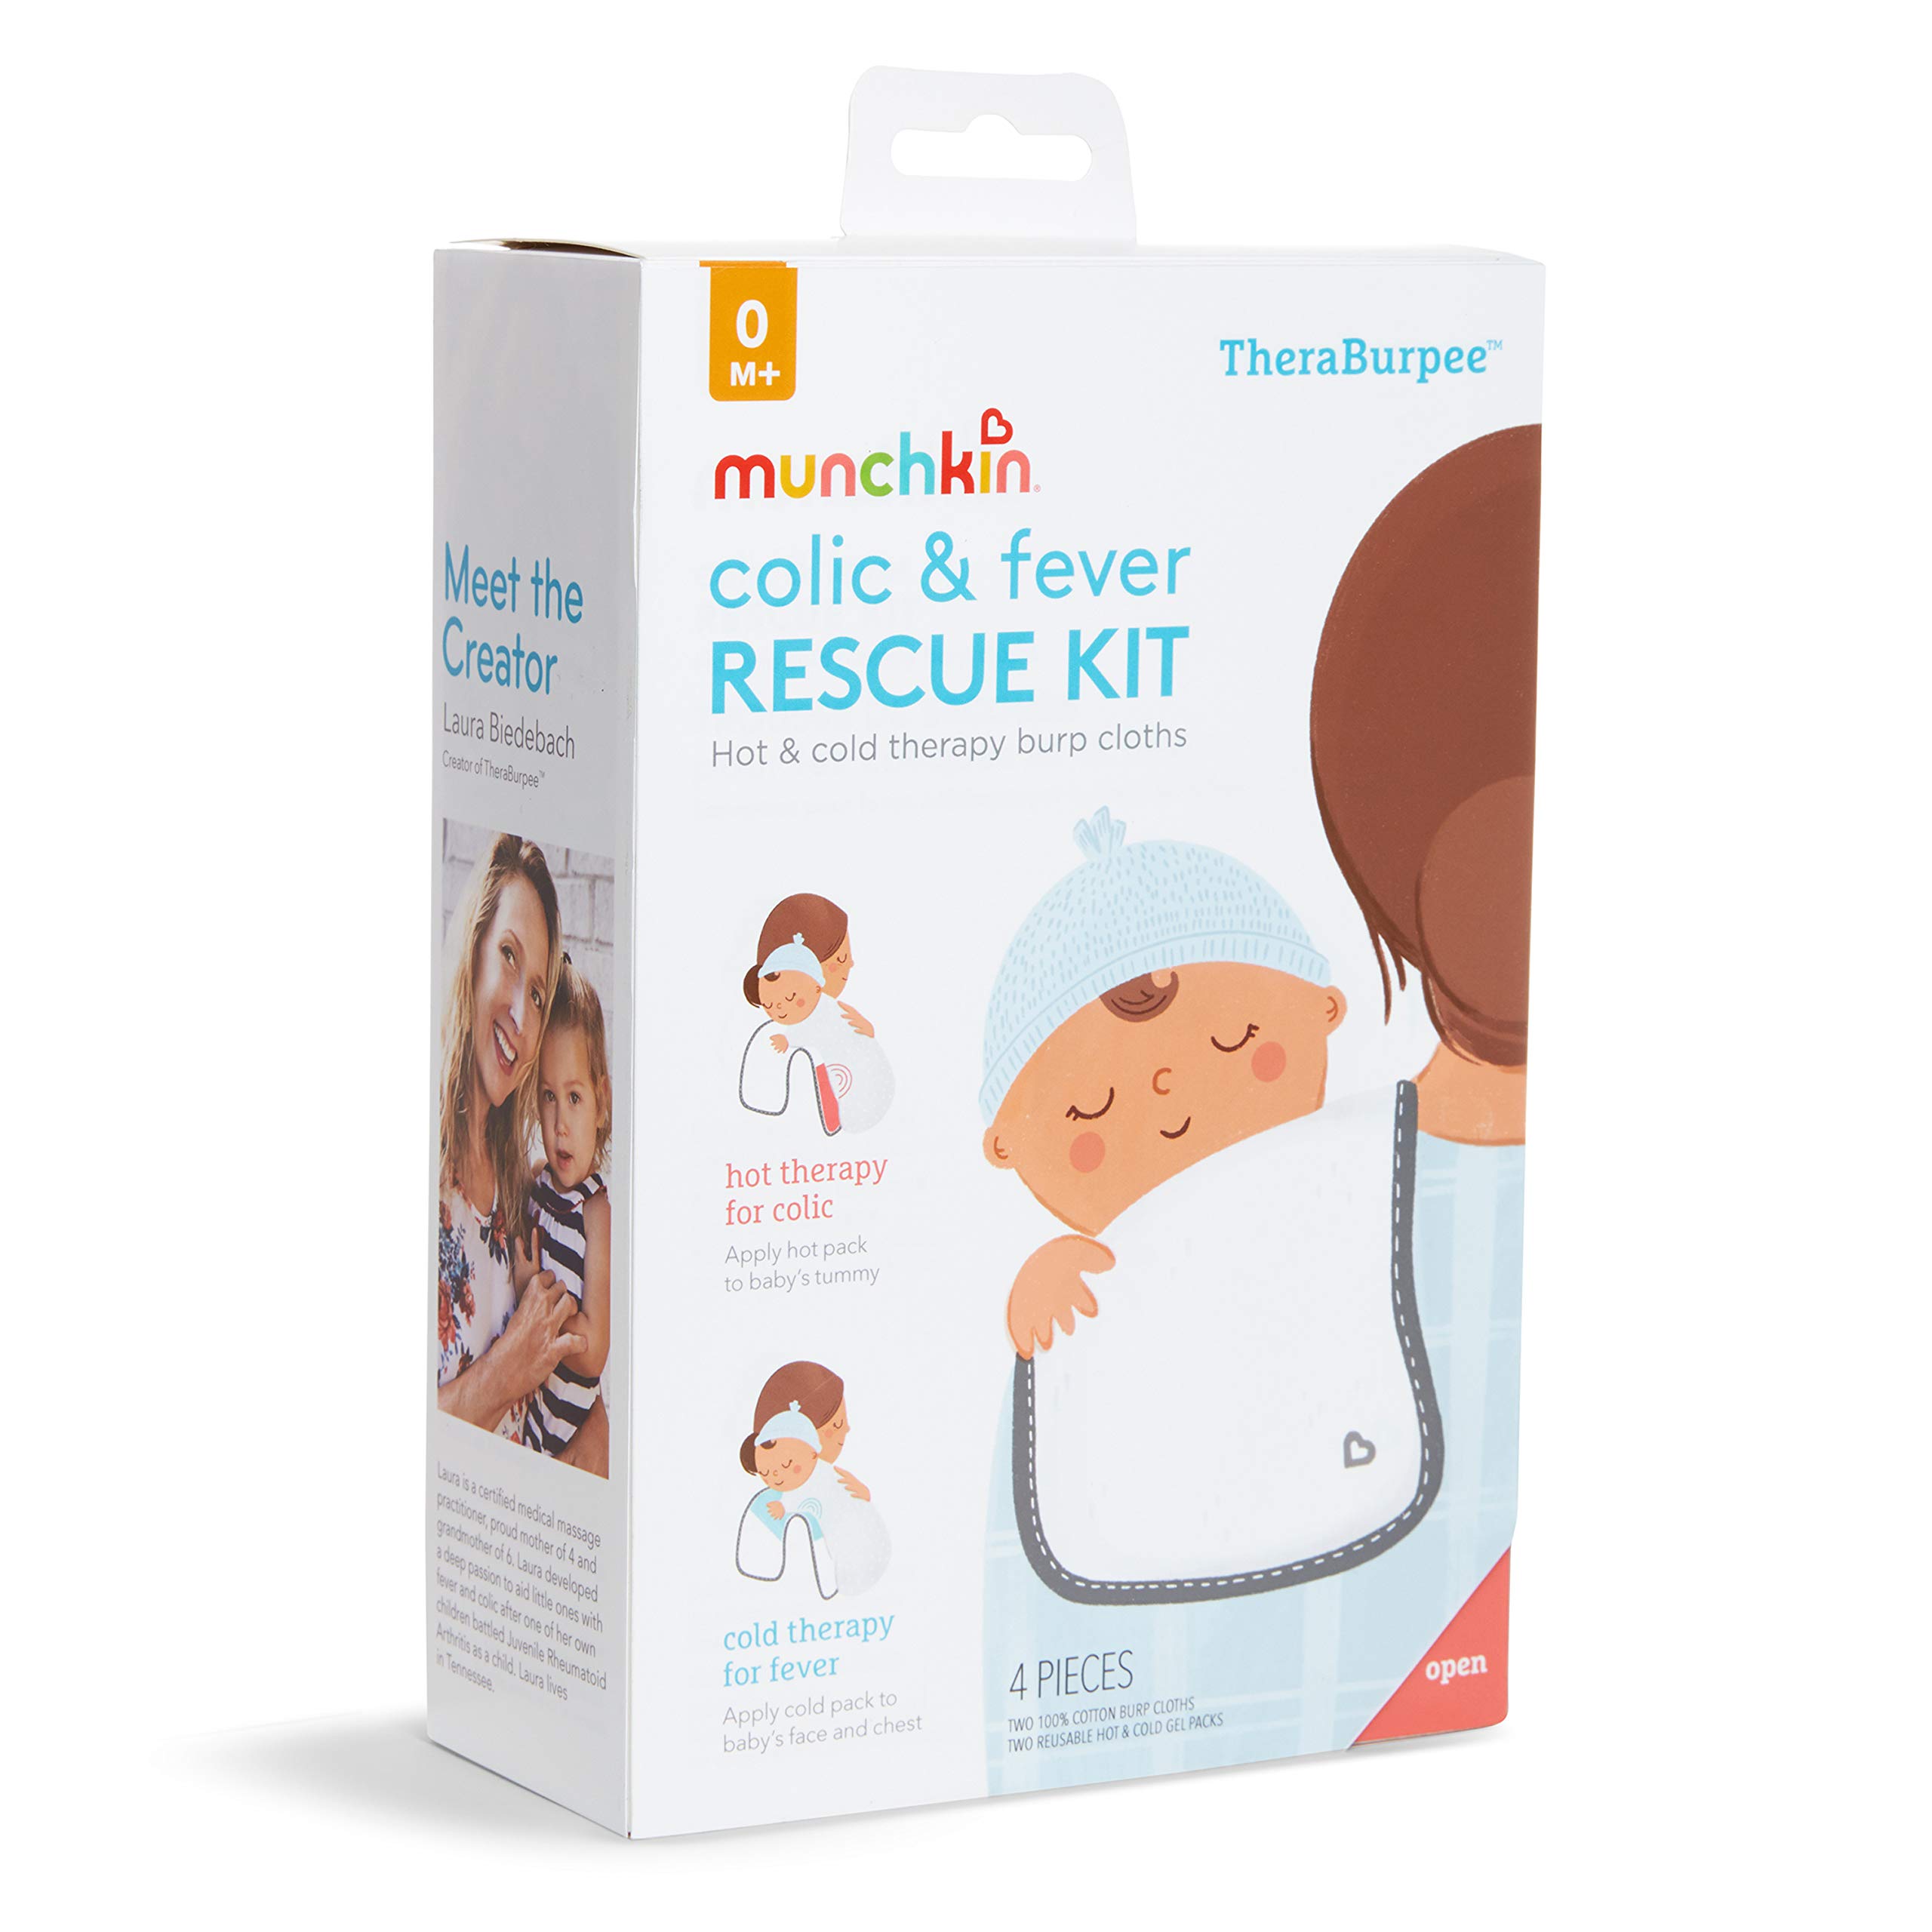 Munchkin® TheraBurpee Colic & Fever Rescue Kit with Hot & Cold Therapy Burp Cloths